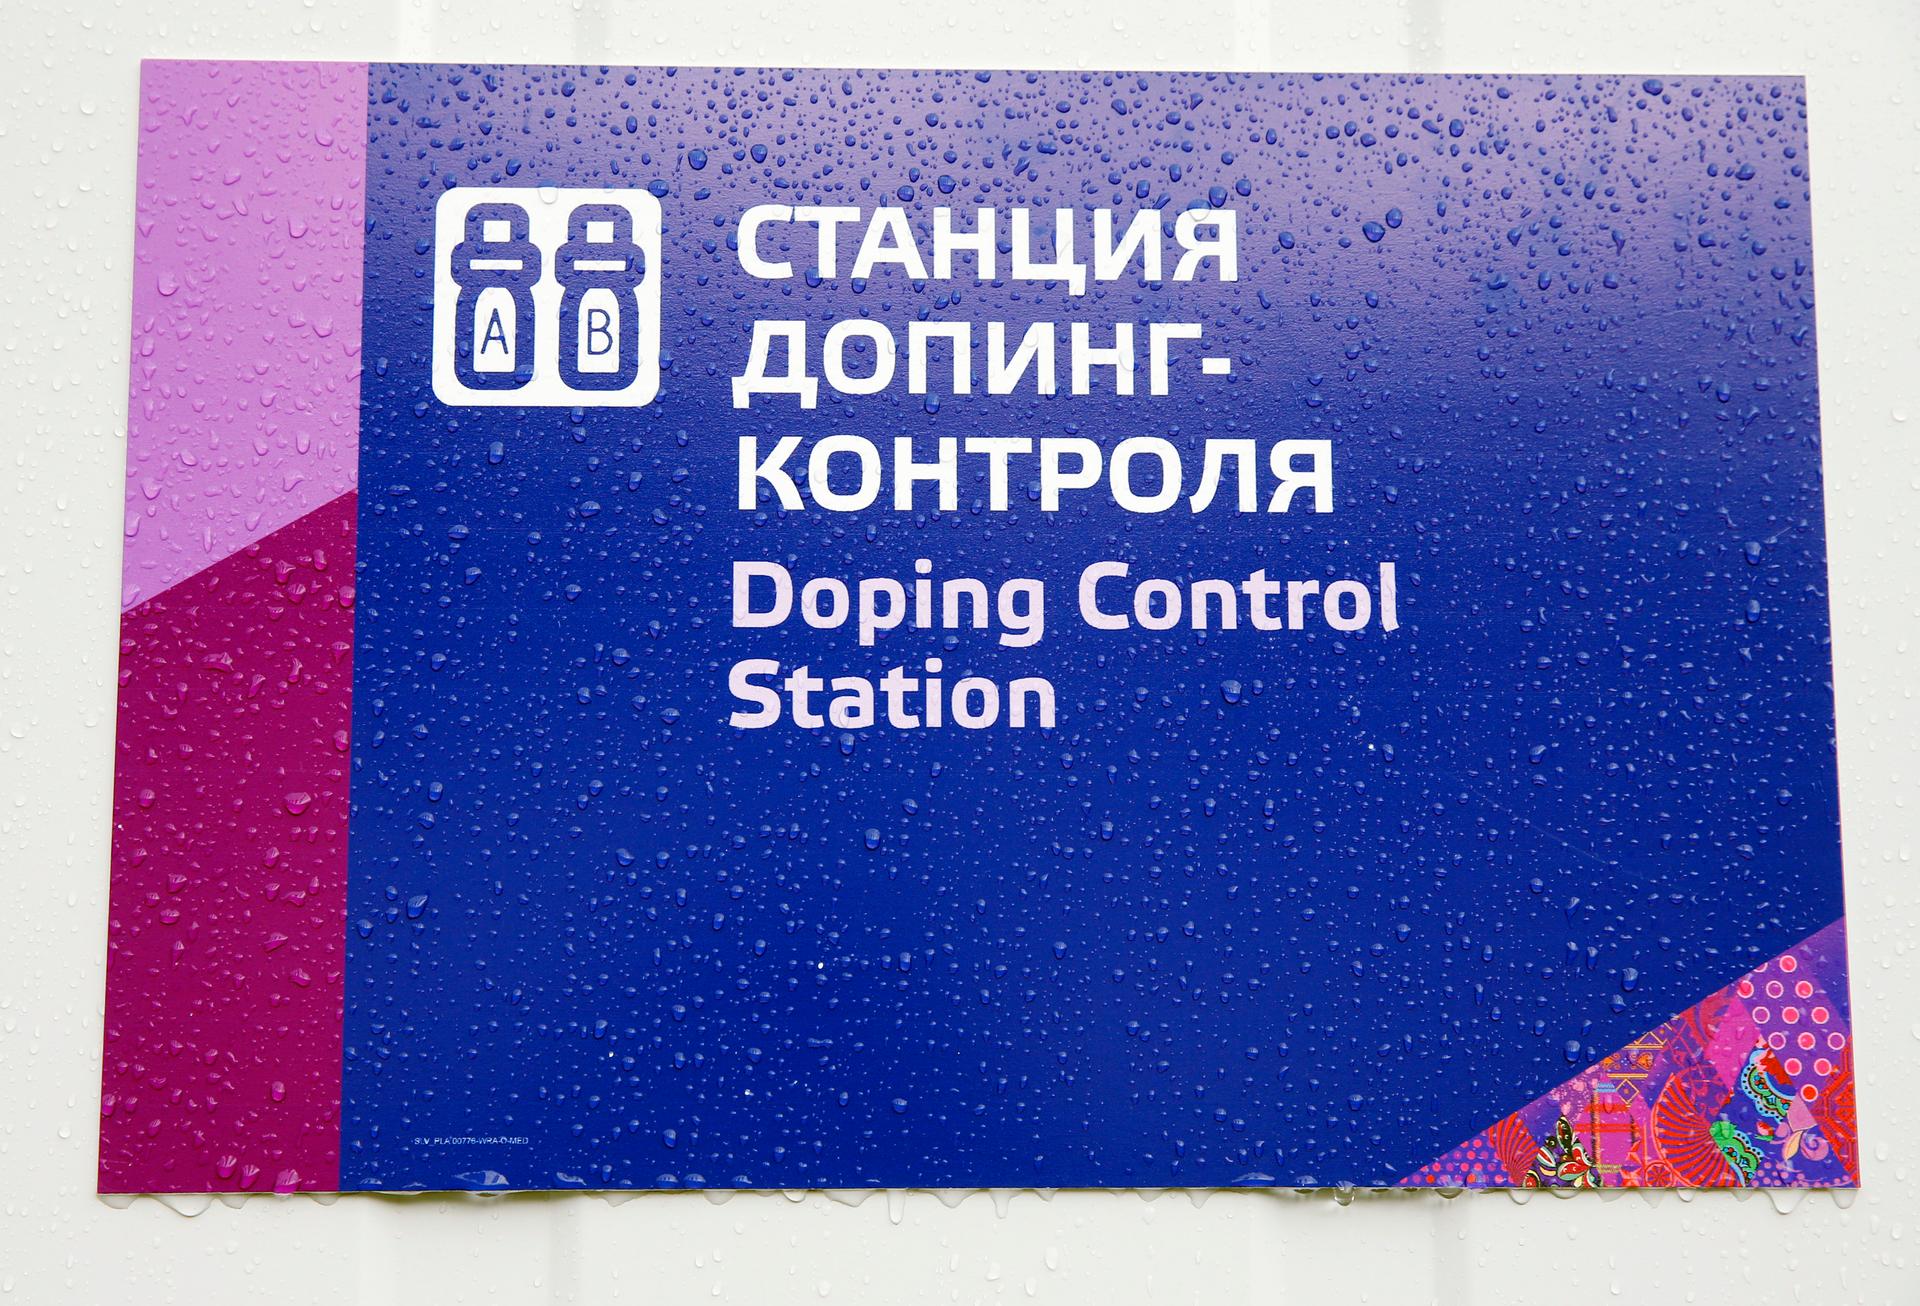 A sign at the Doping Control Station at the Sanki Sliding Center in Rosa Khutor, taken during the 2014 Winter Olympics in Sochi, Russia.